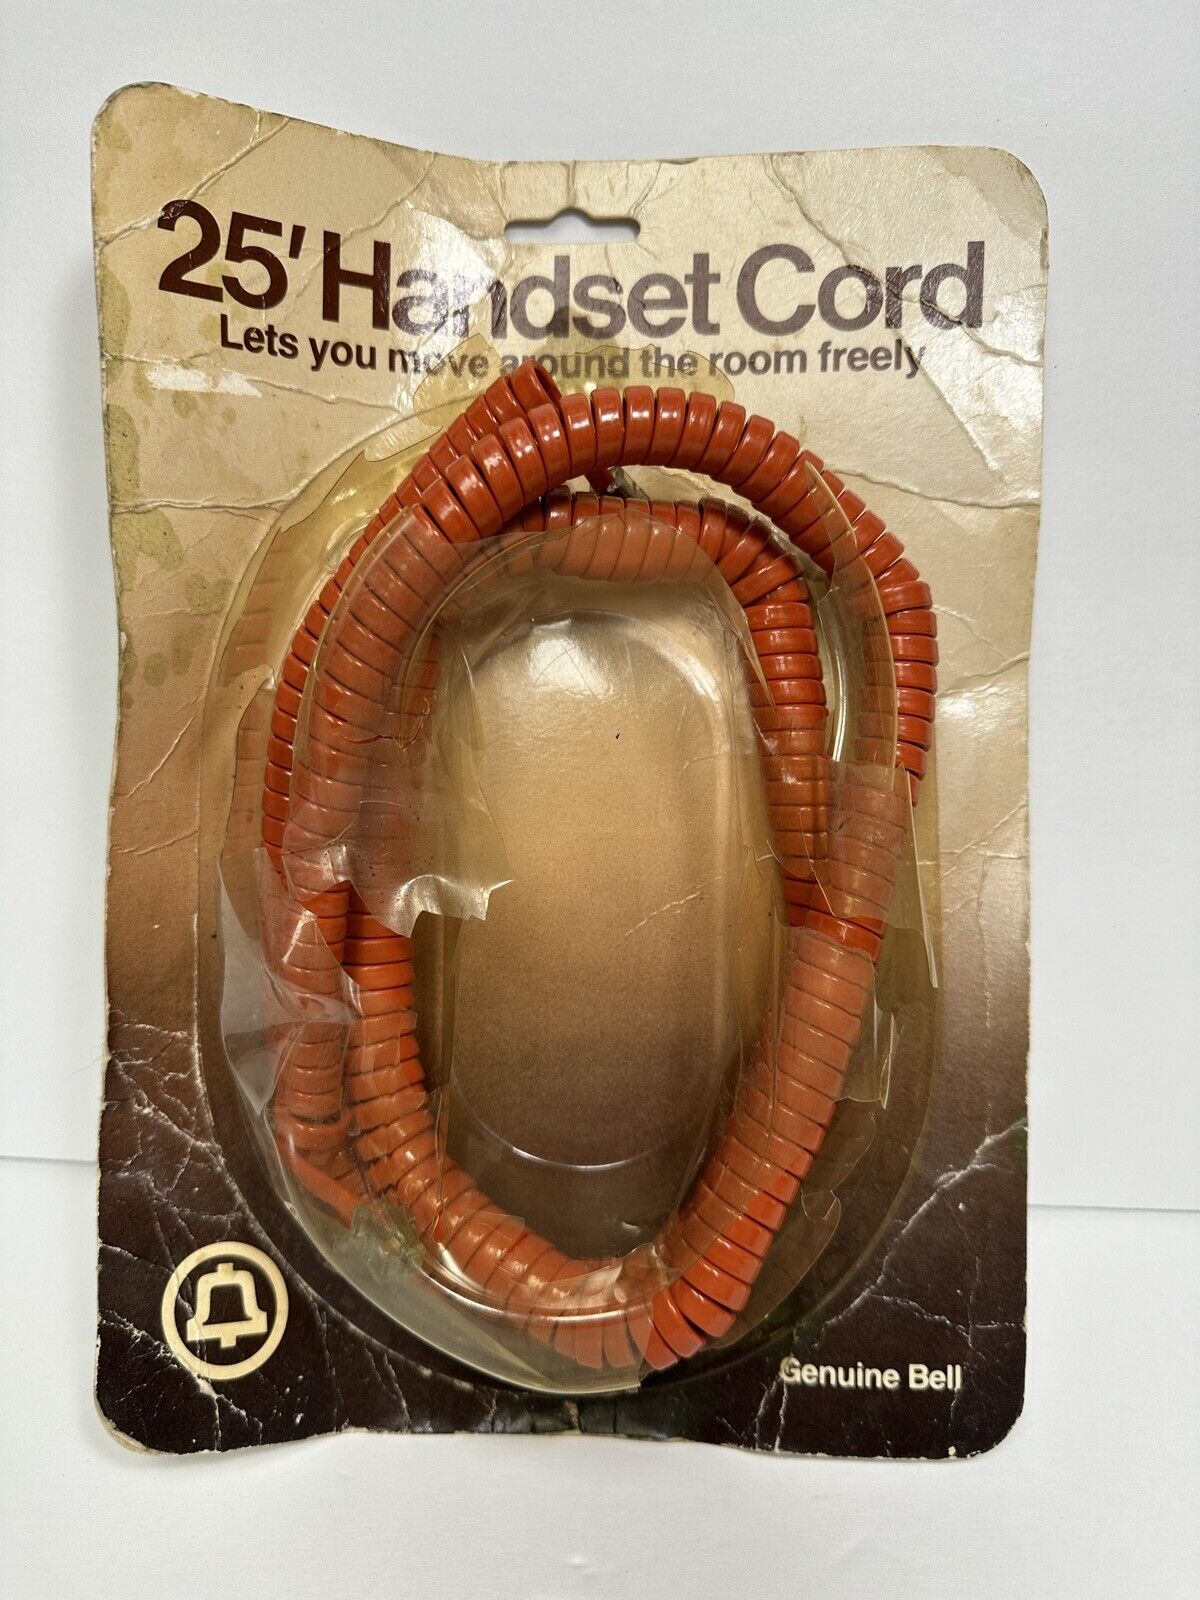 NOS Genuine Bell 25ft Handset Cord Rust Colored Packaging Destroyed